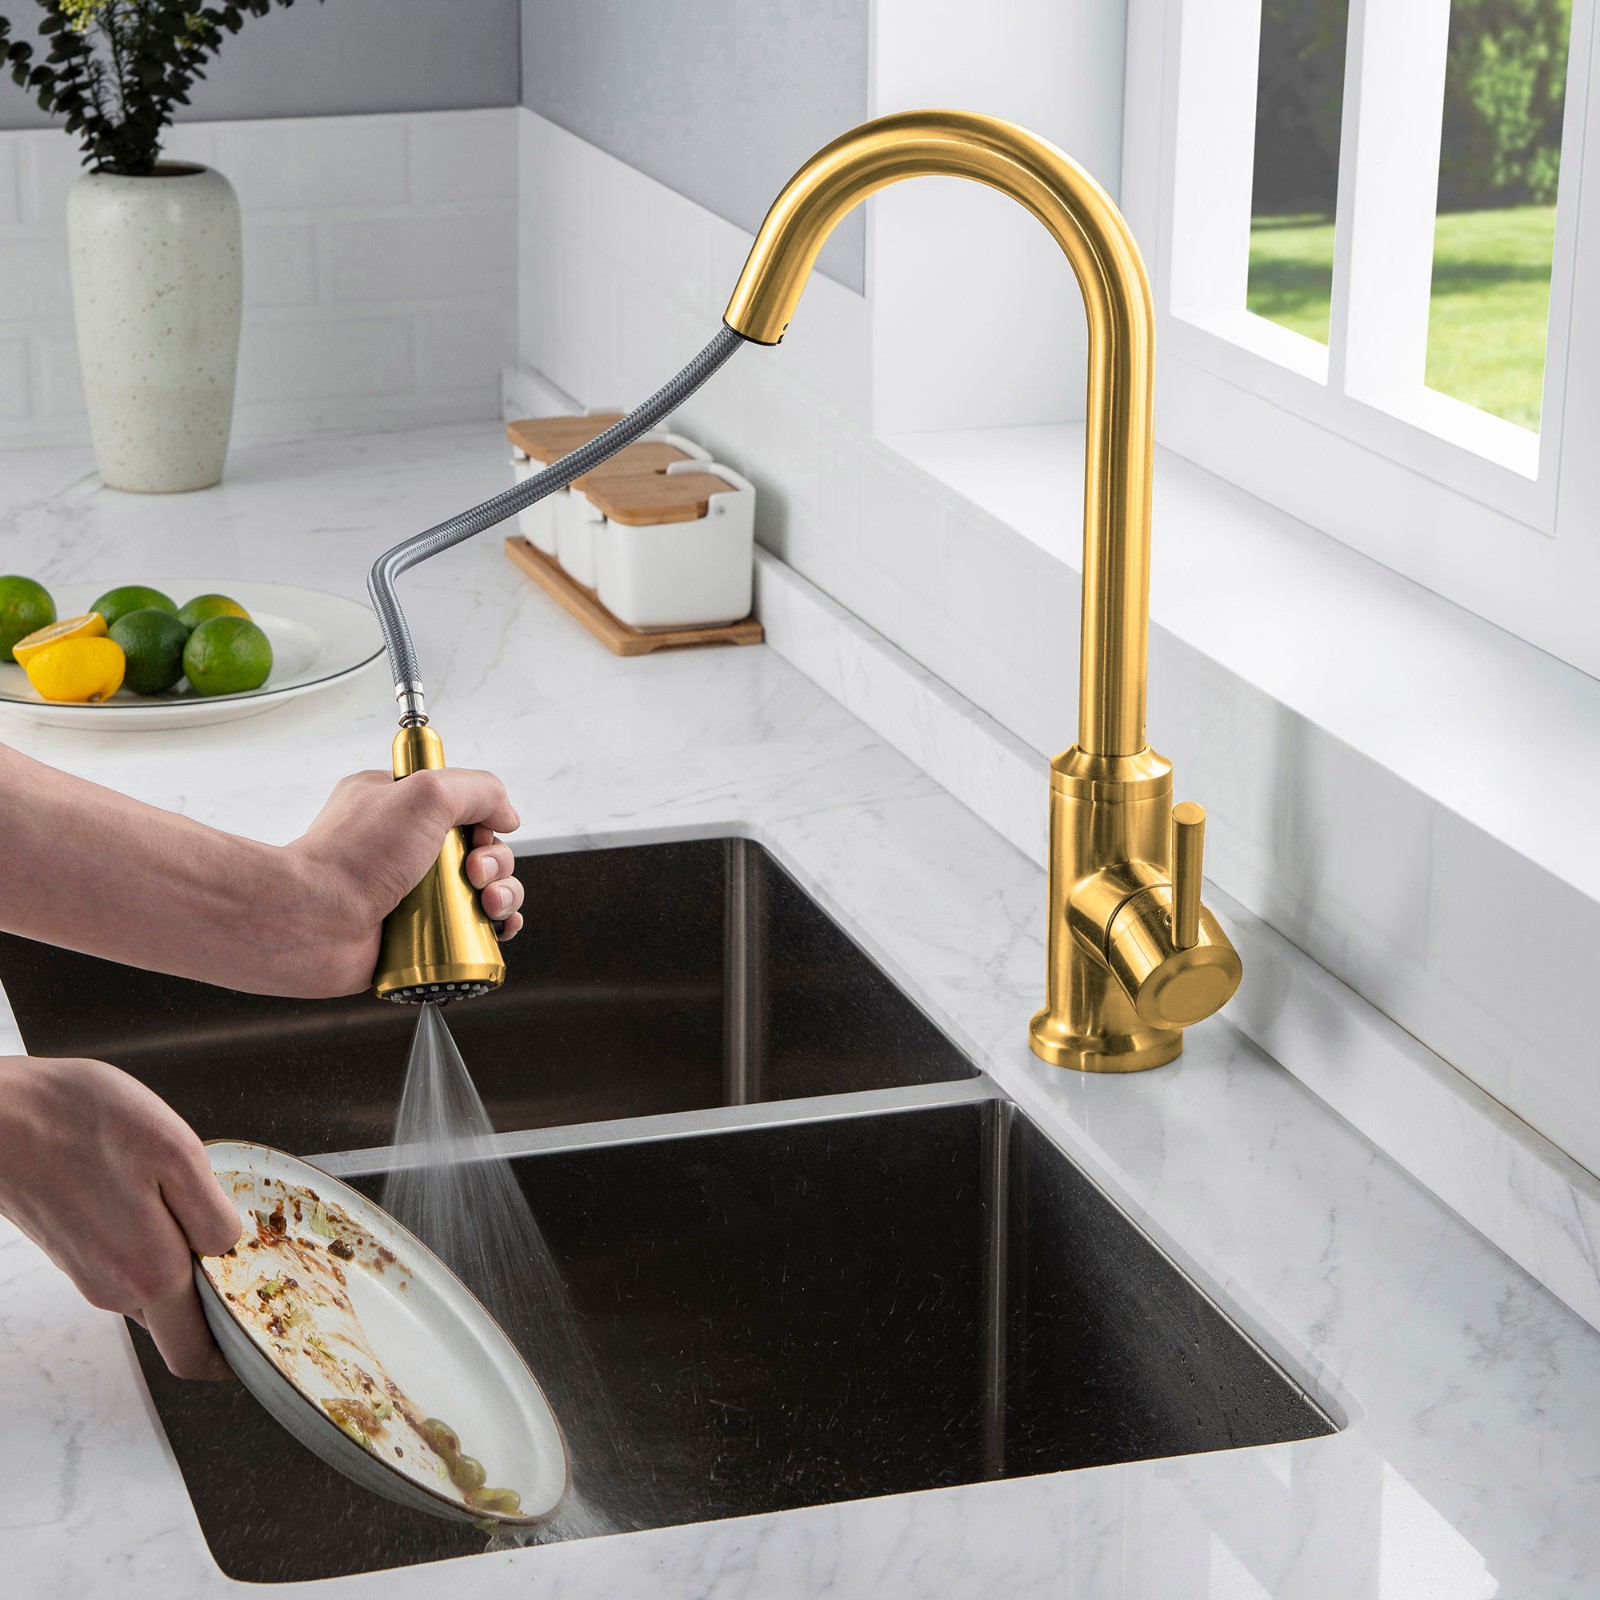  WOODBRIDGE WK101201BG Stainless Steel Single Handle Pull Down Kitchen Faucet in Brushed Gold Finish._4985